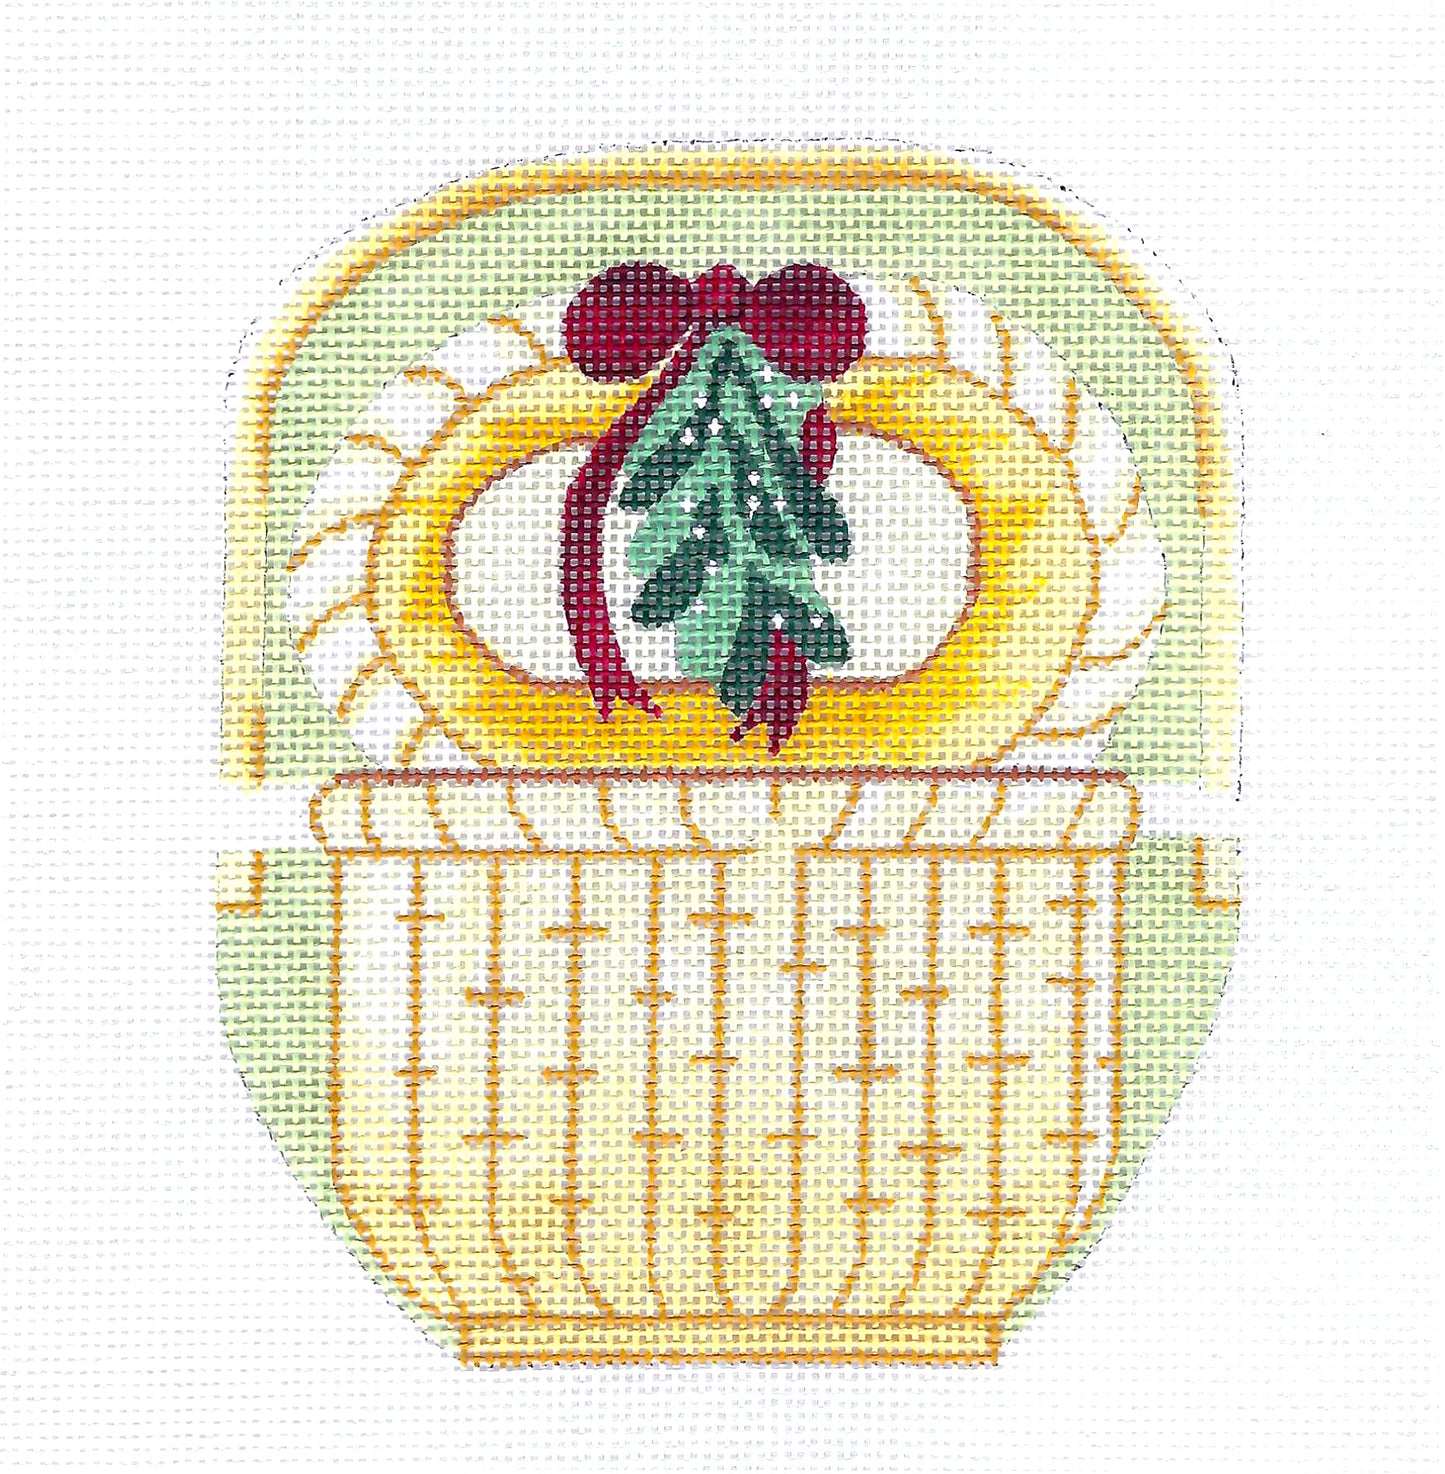 Holiday Nantucket Basket with Mistletoe handpainted Needlepoint Canvas by Silver Needle